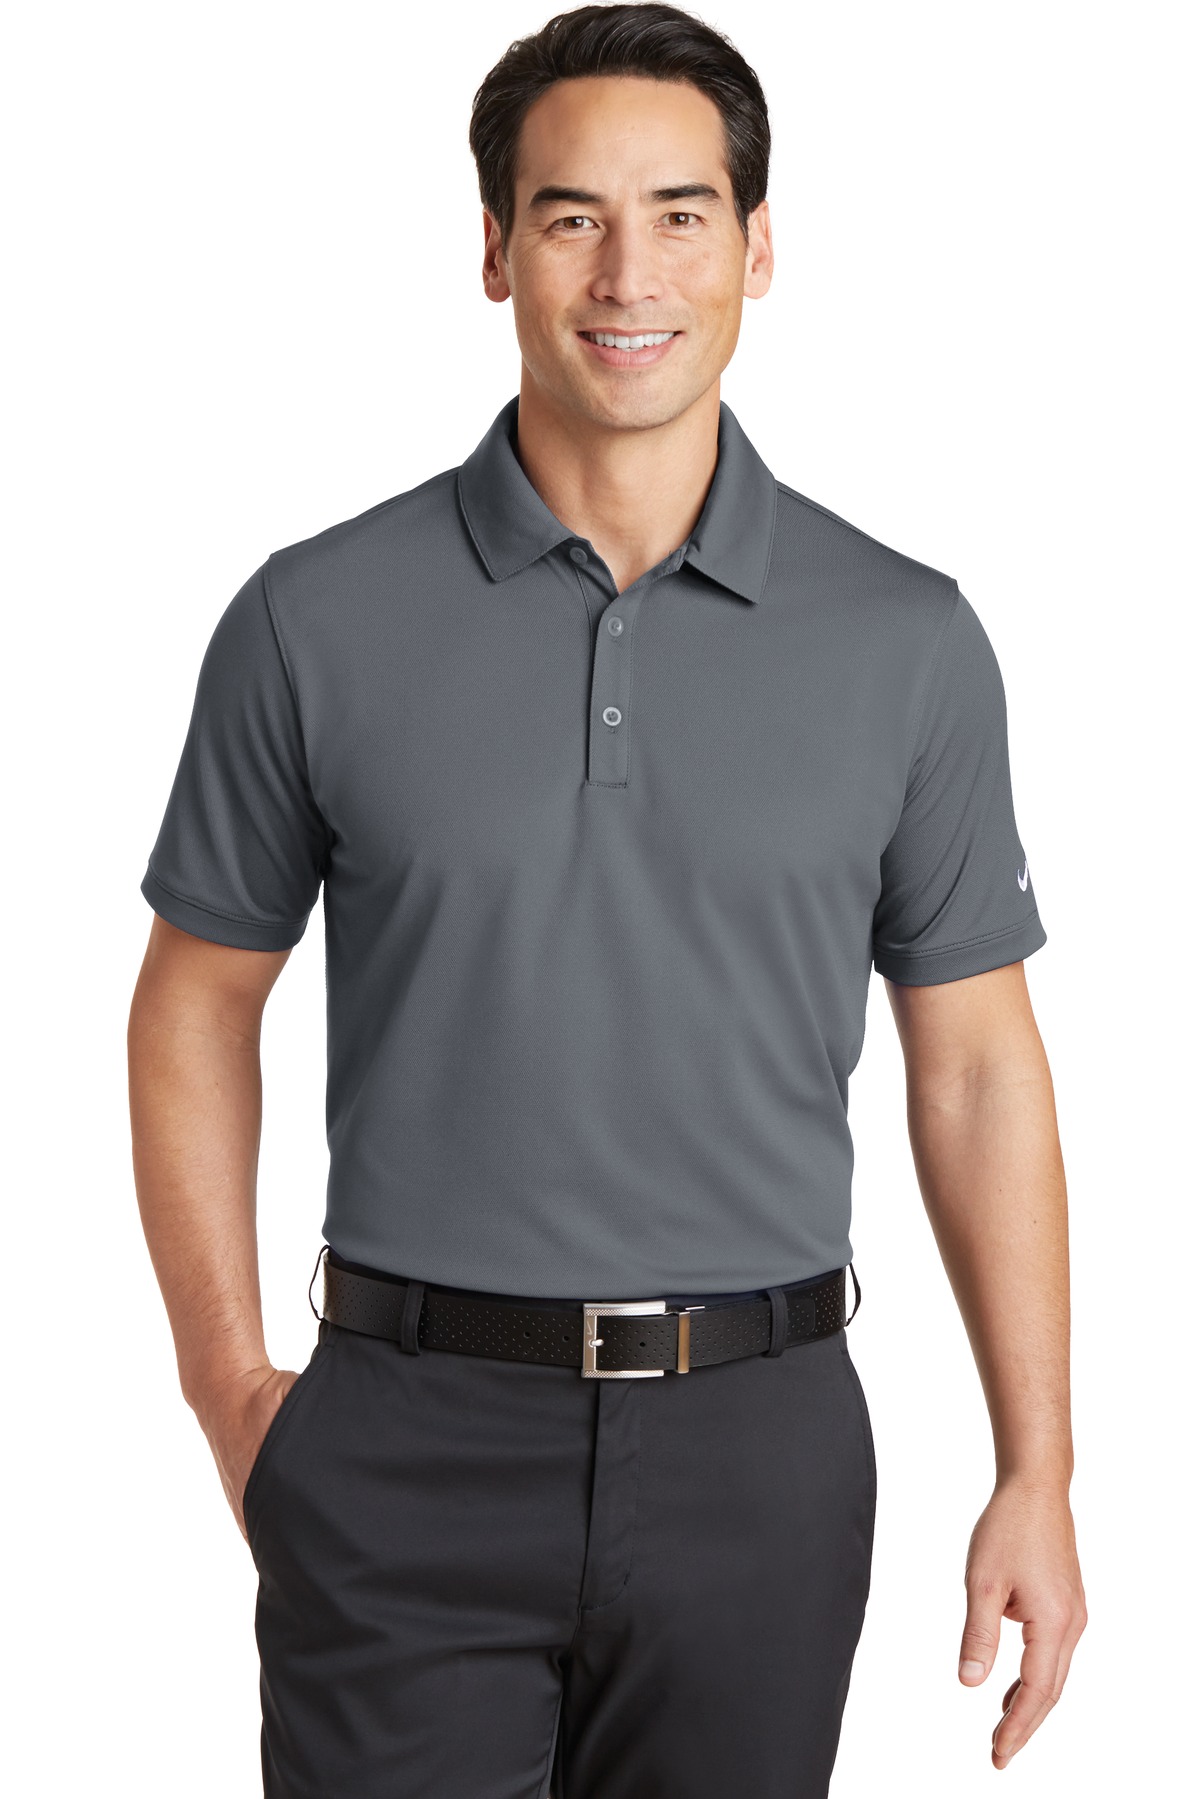 Nike Golf 746099 - Dri-FIT Solid Icon Pique Polo - Men's T-Shirts